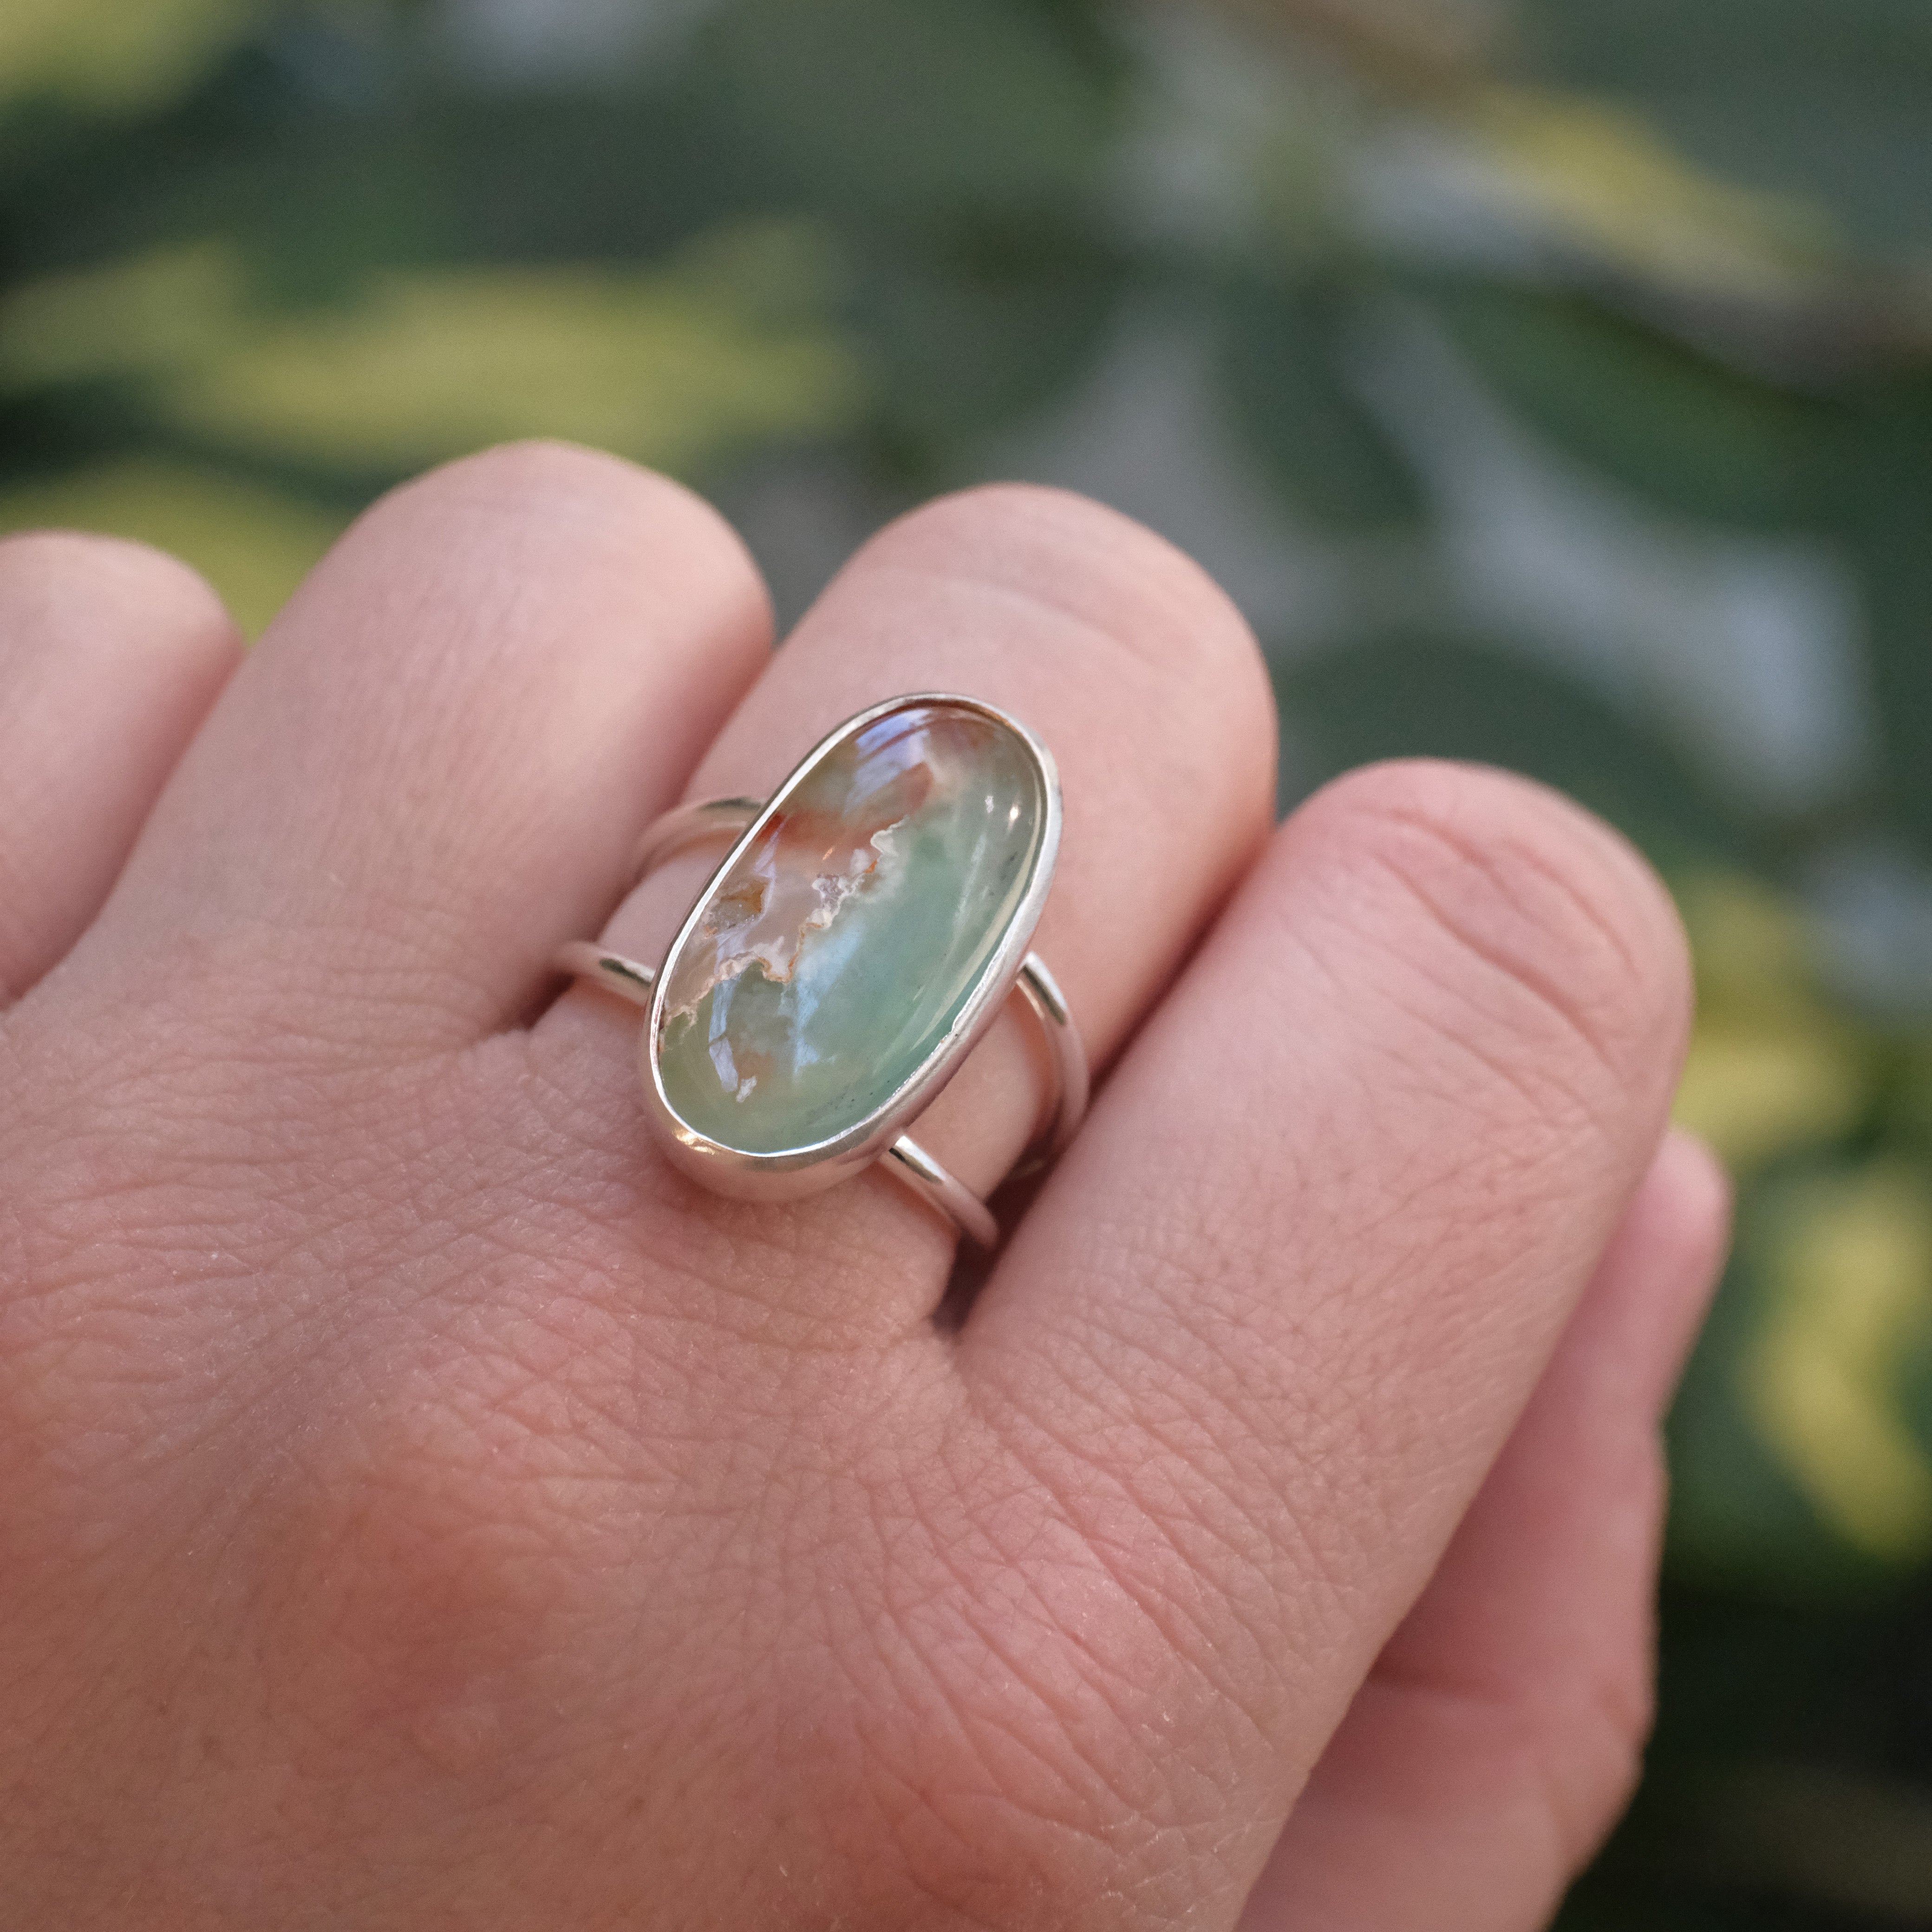 Waverider Aqua Chalcedony Ring (Size 6.5) - One of a Kind